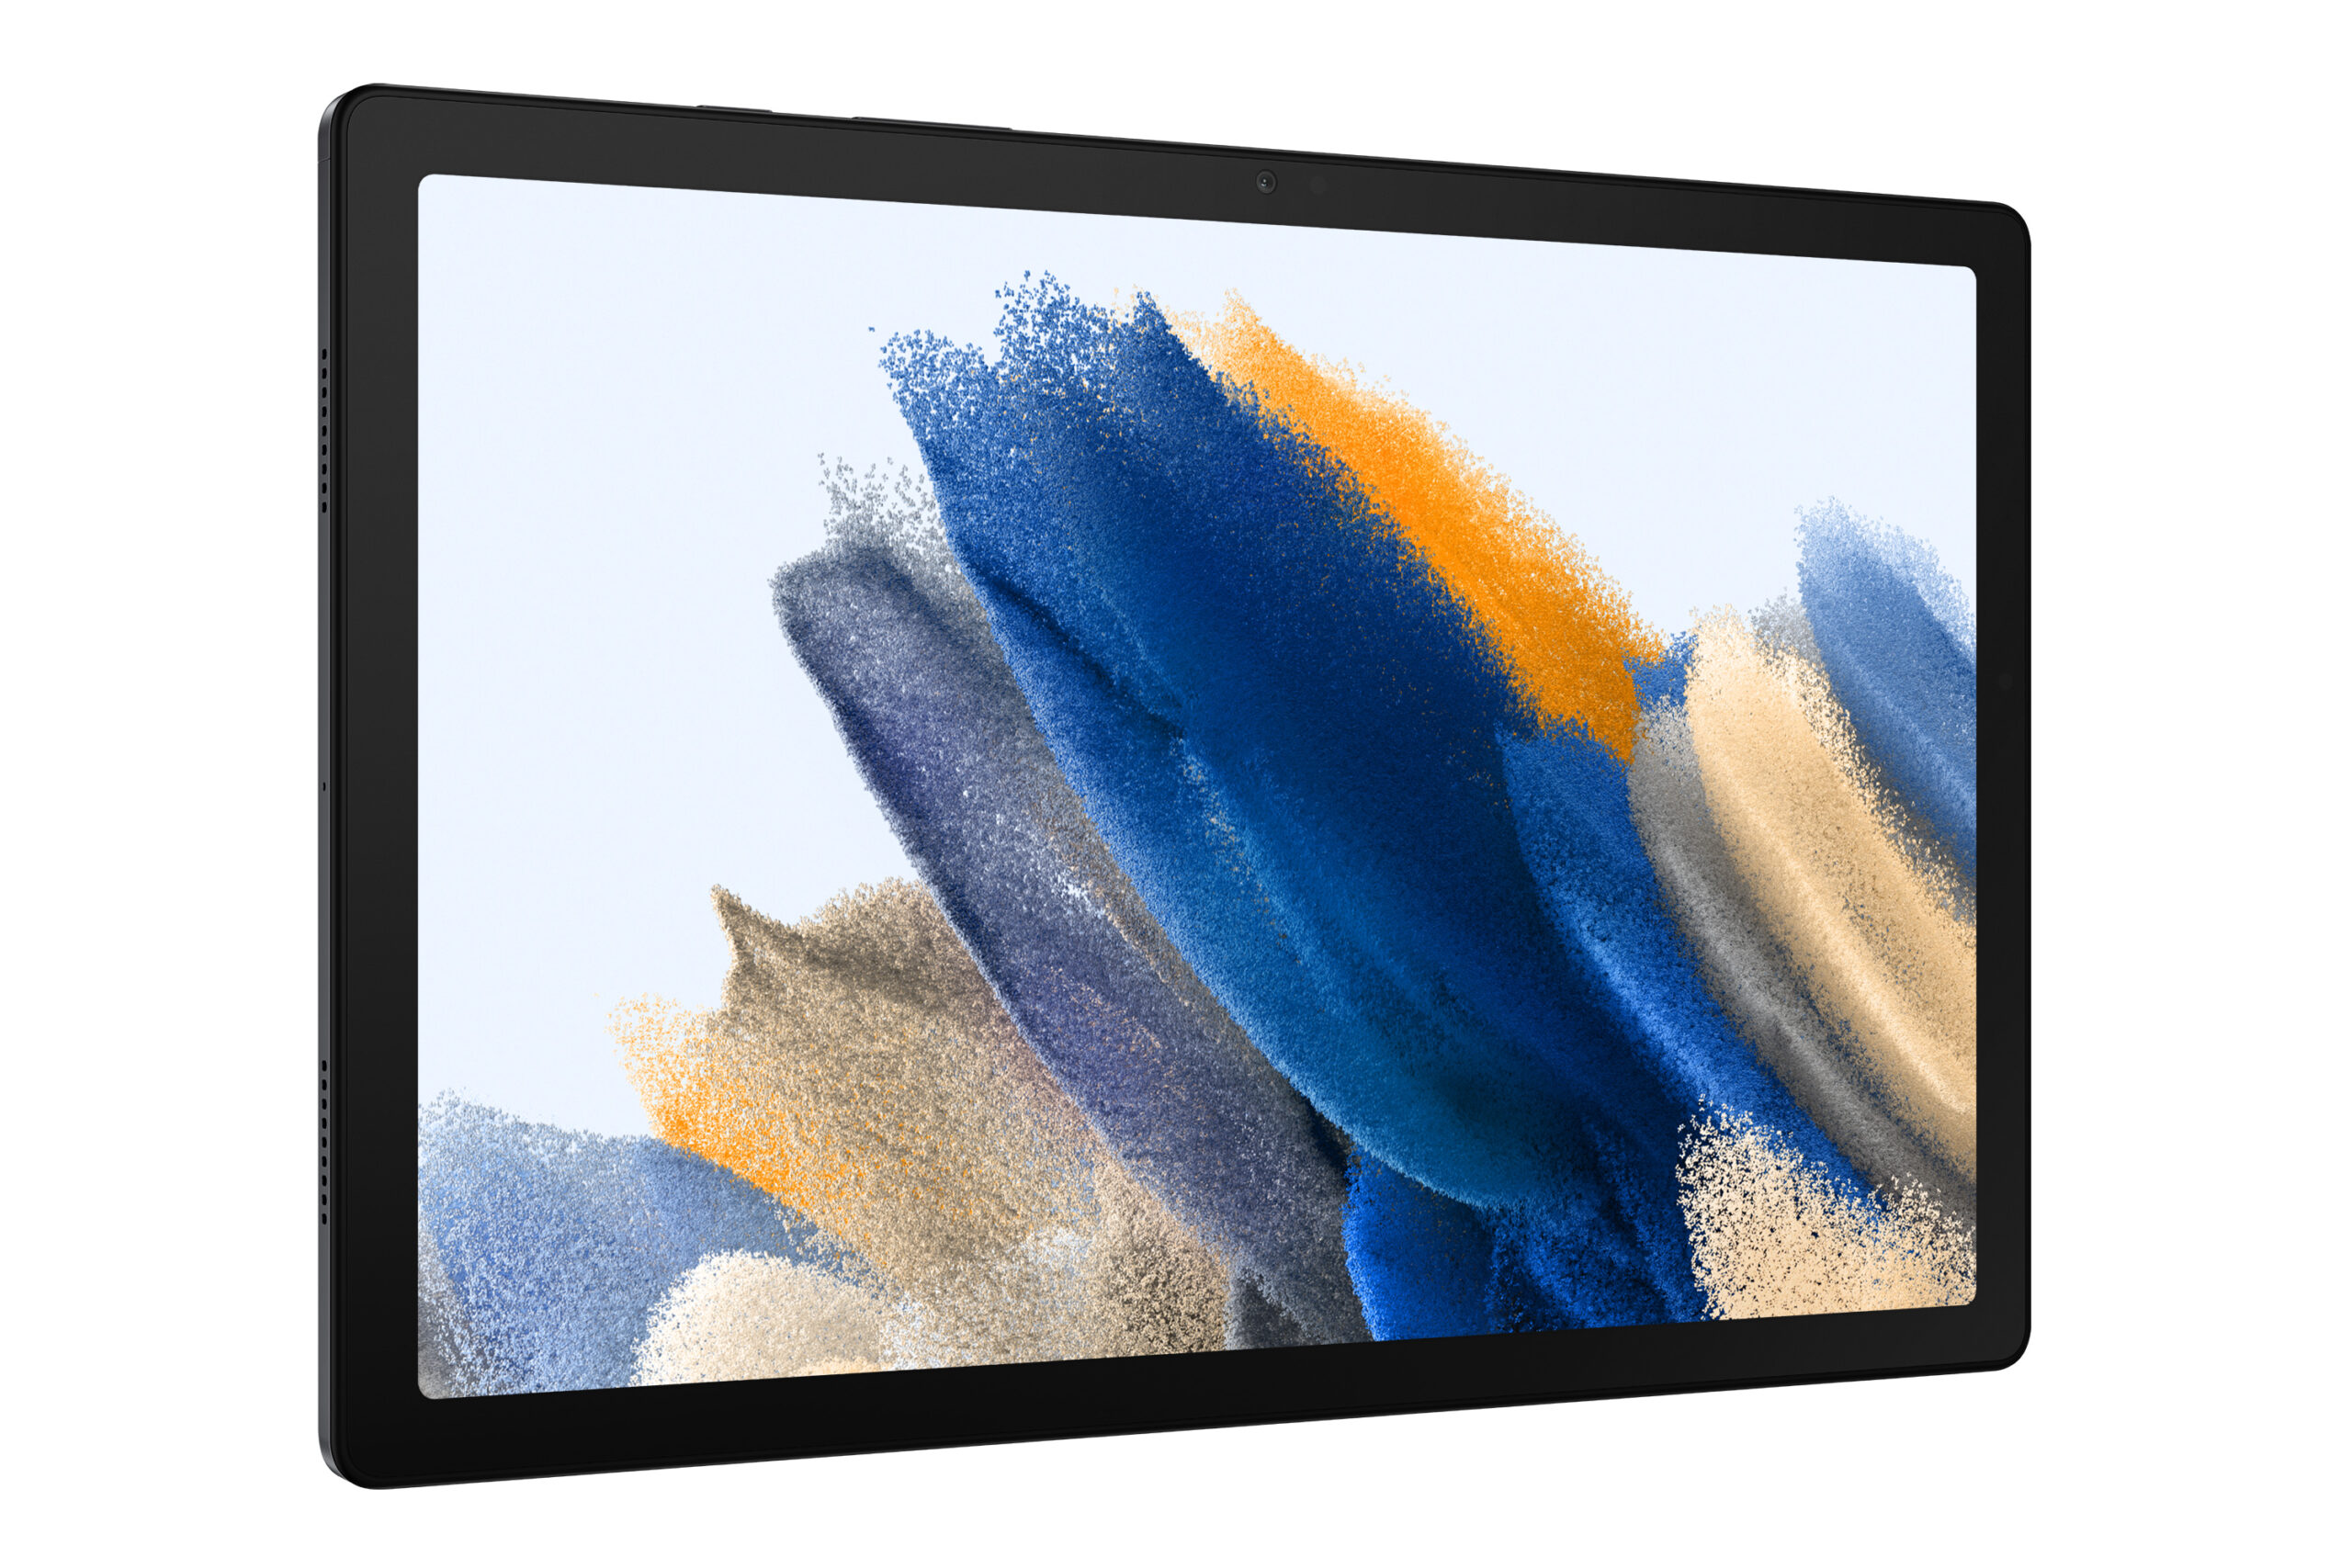 Sleek Samsung’s new Galaxy Tab A8: More screen, more power, more performance